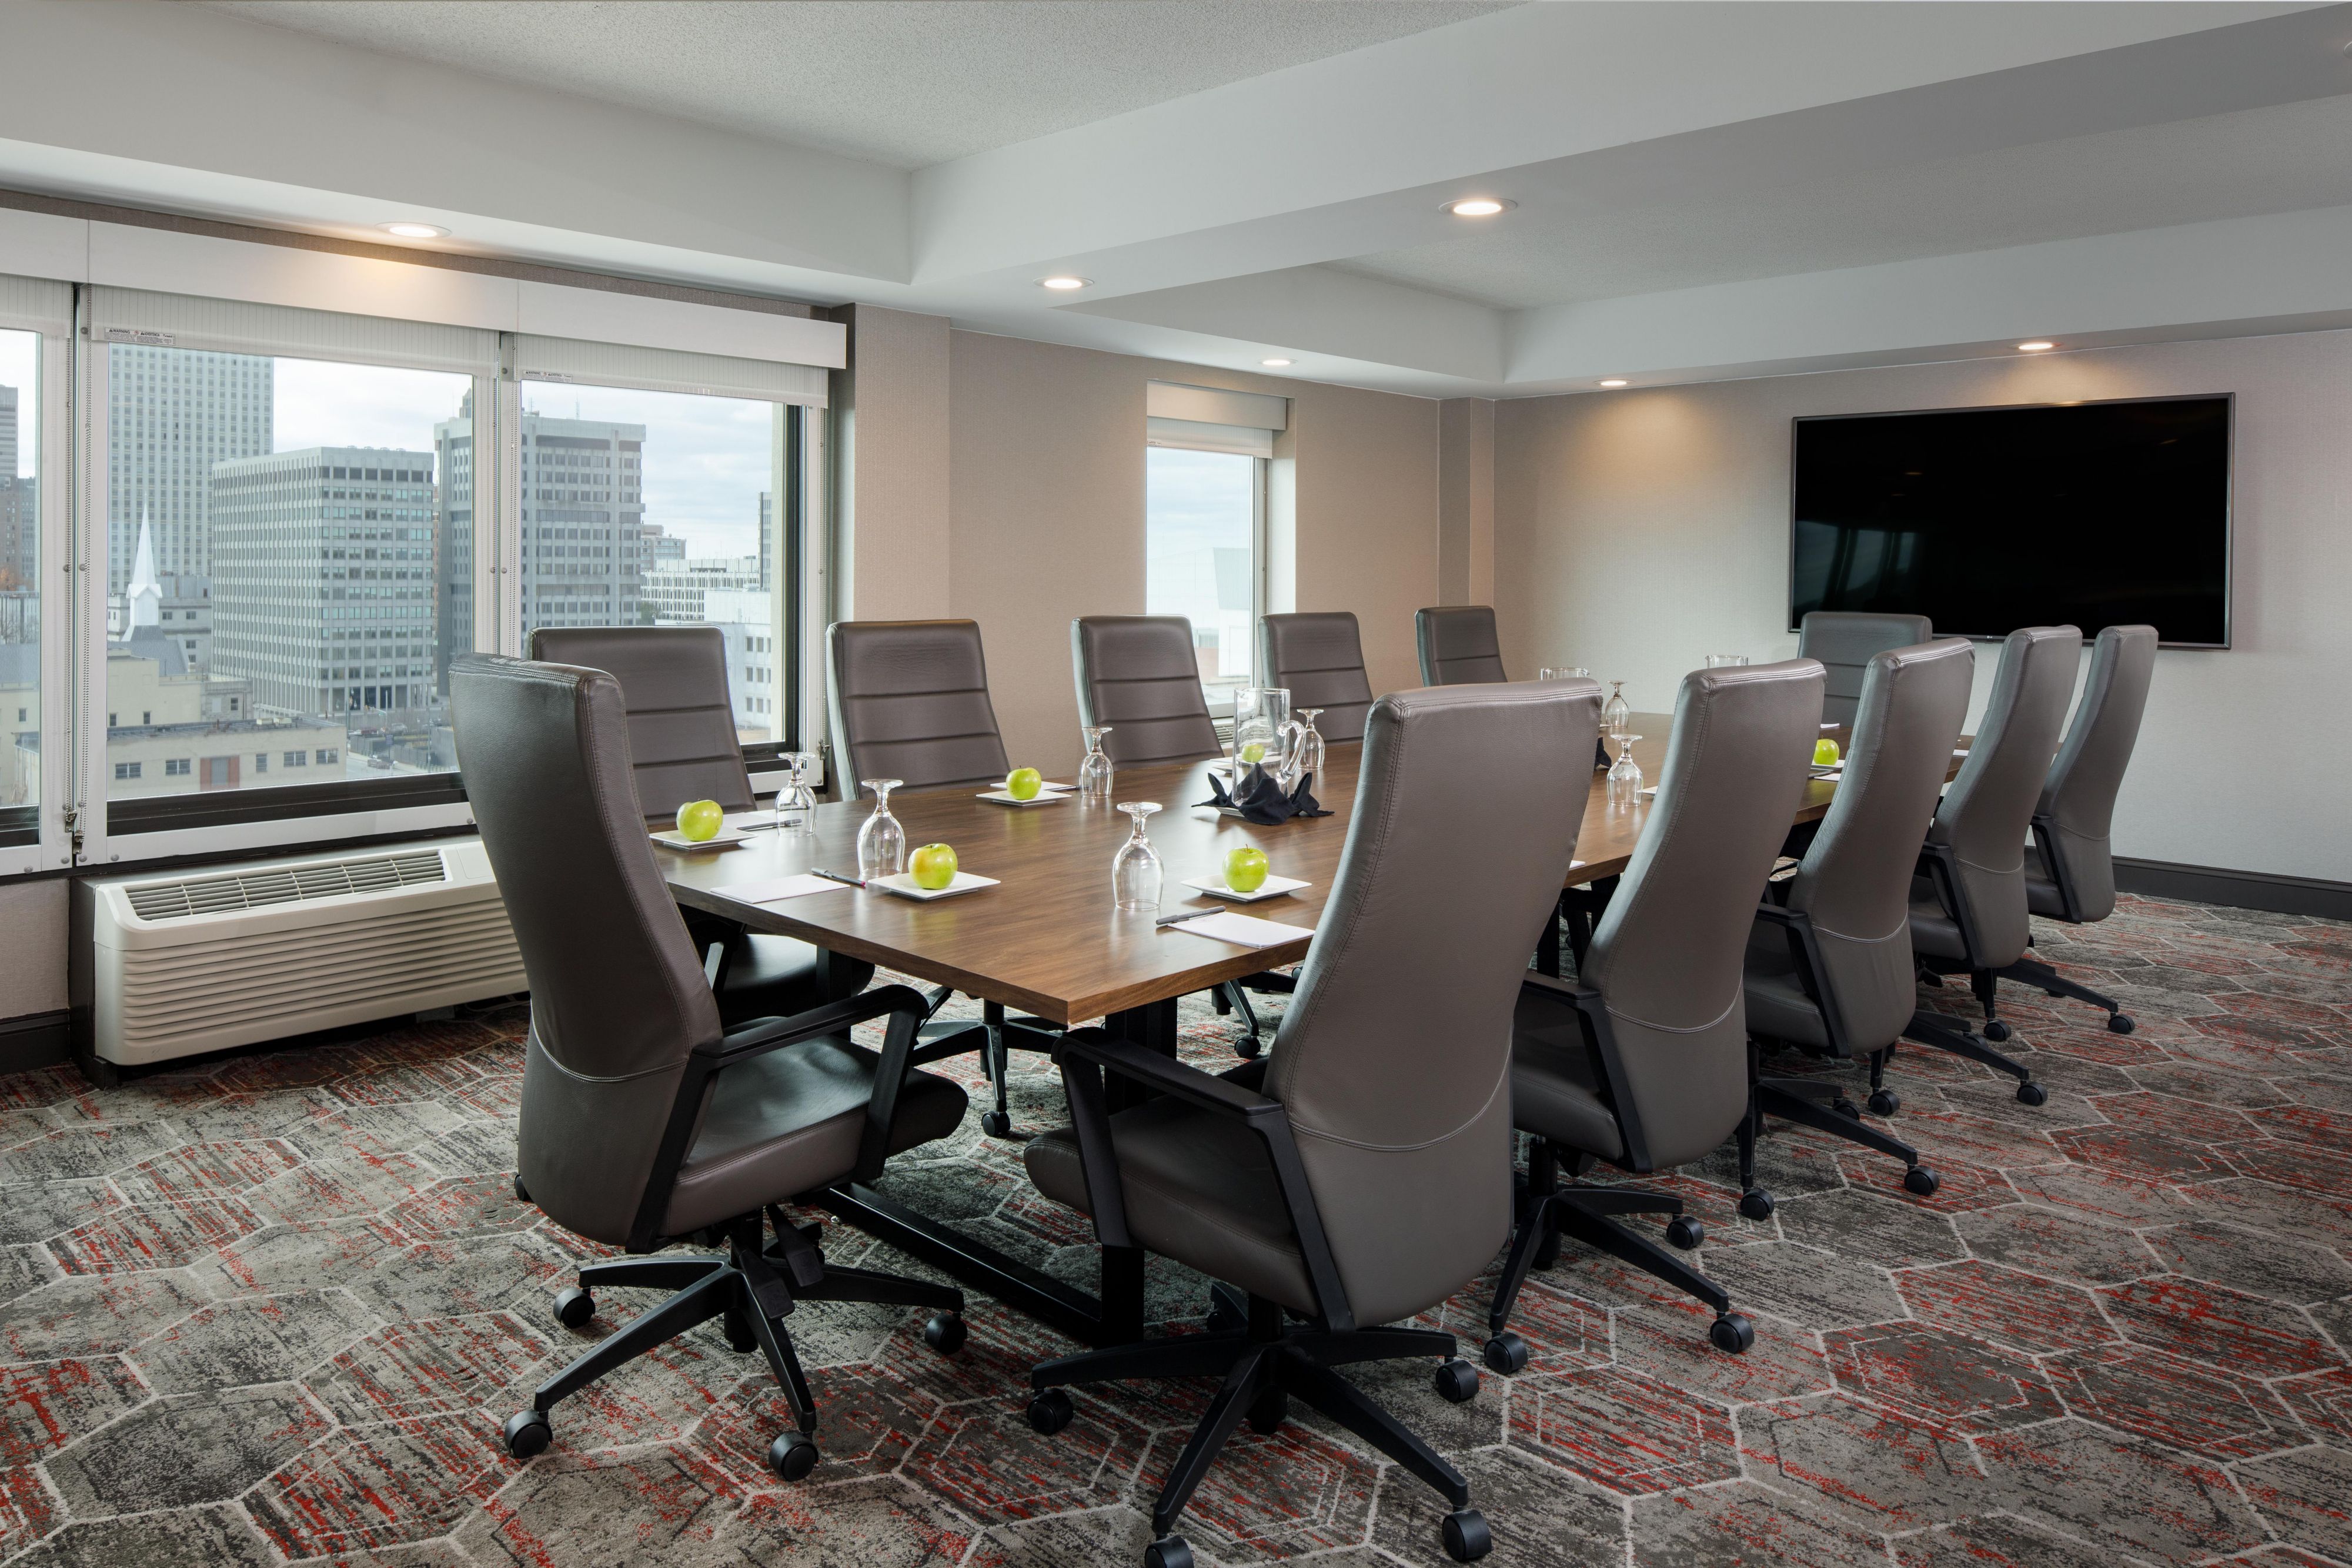 Located on the 11th floor the boardroom has views of downtown